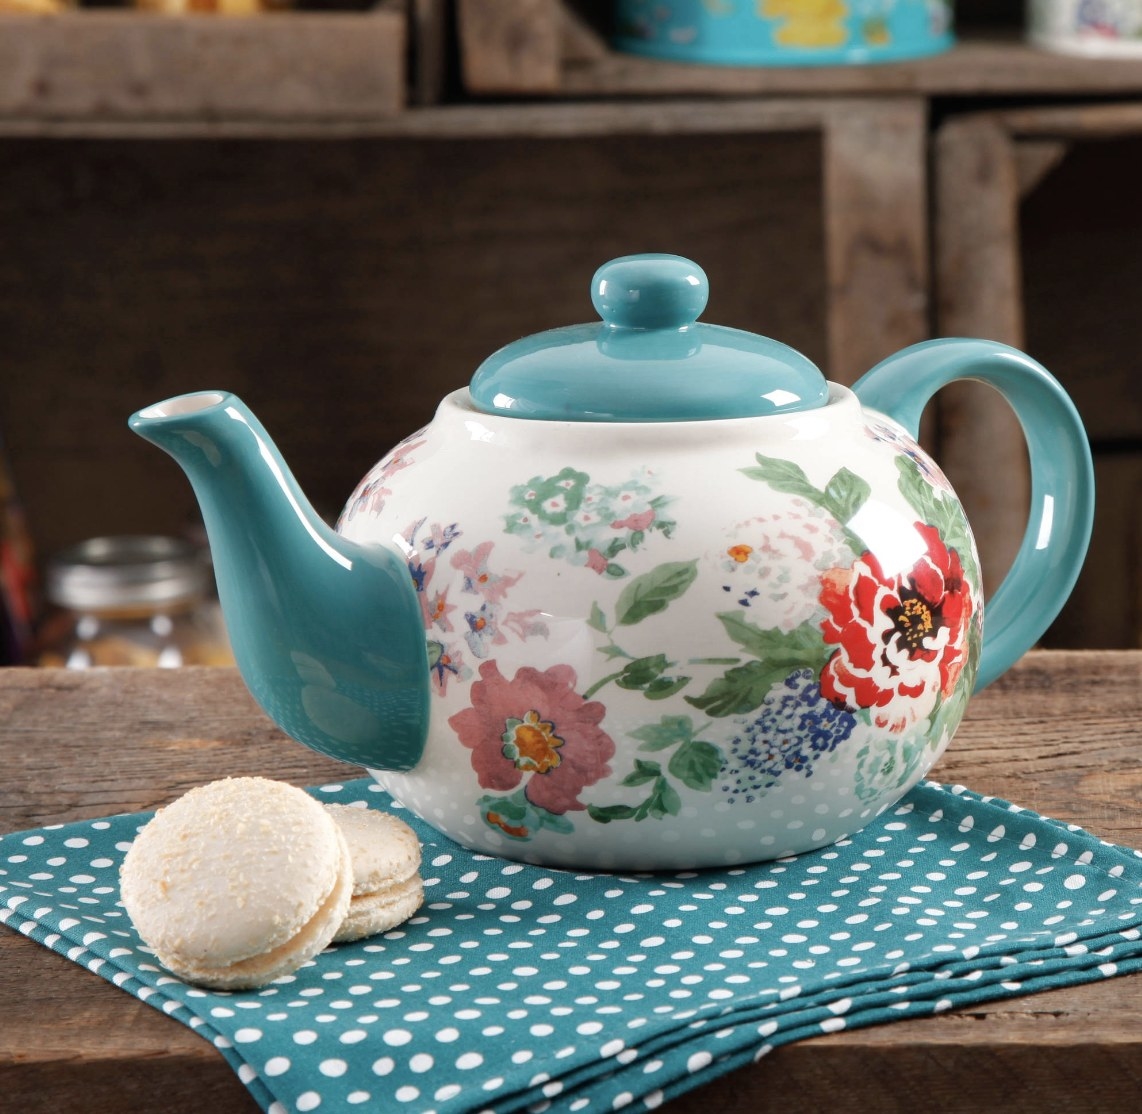 The blue teapot has vibrant floral designs and is atop a blue and white polka dot hand towel